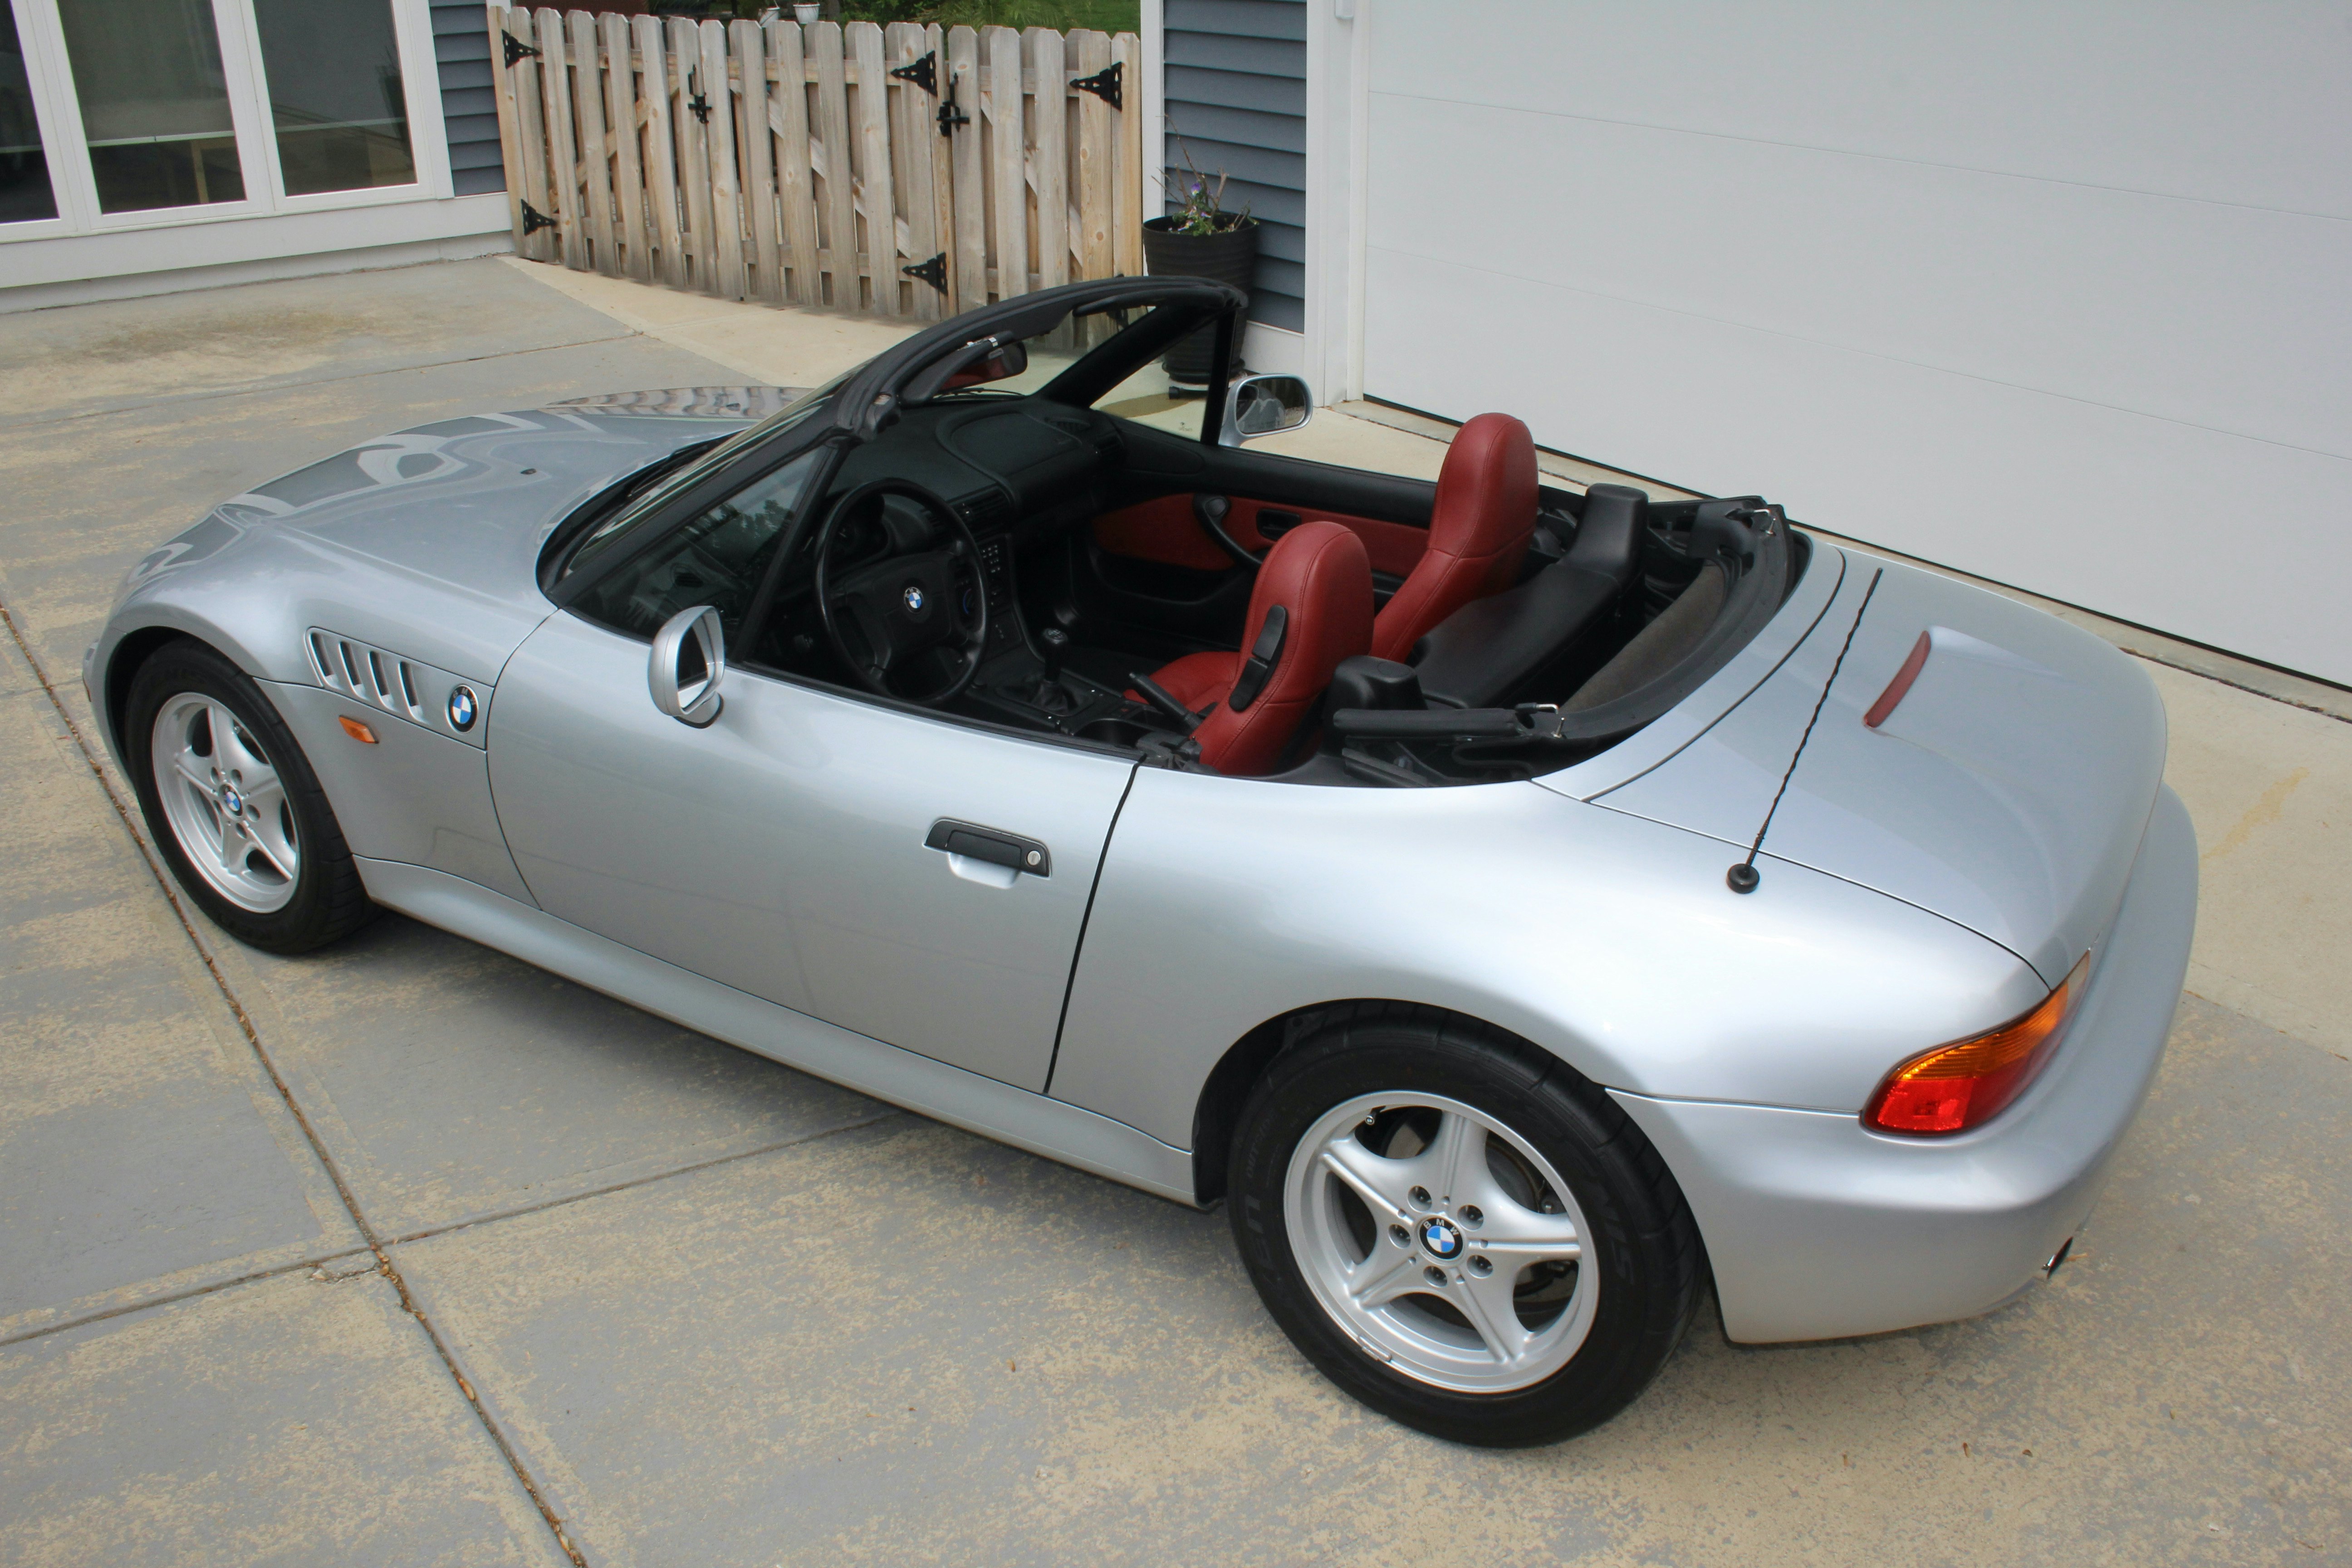 At $12,999, Is This 1996 BMW Z3 M A Real Deal?